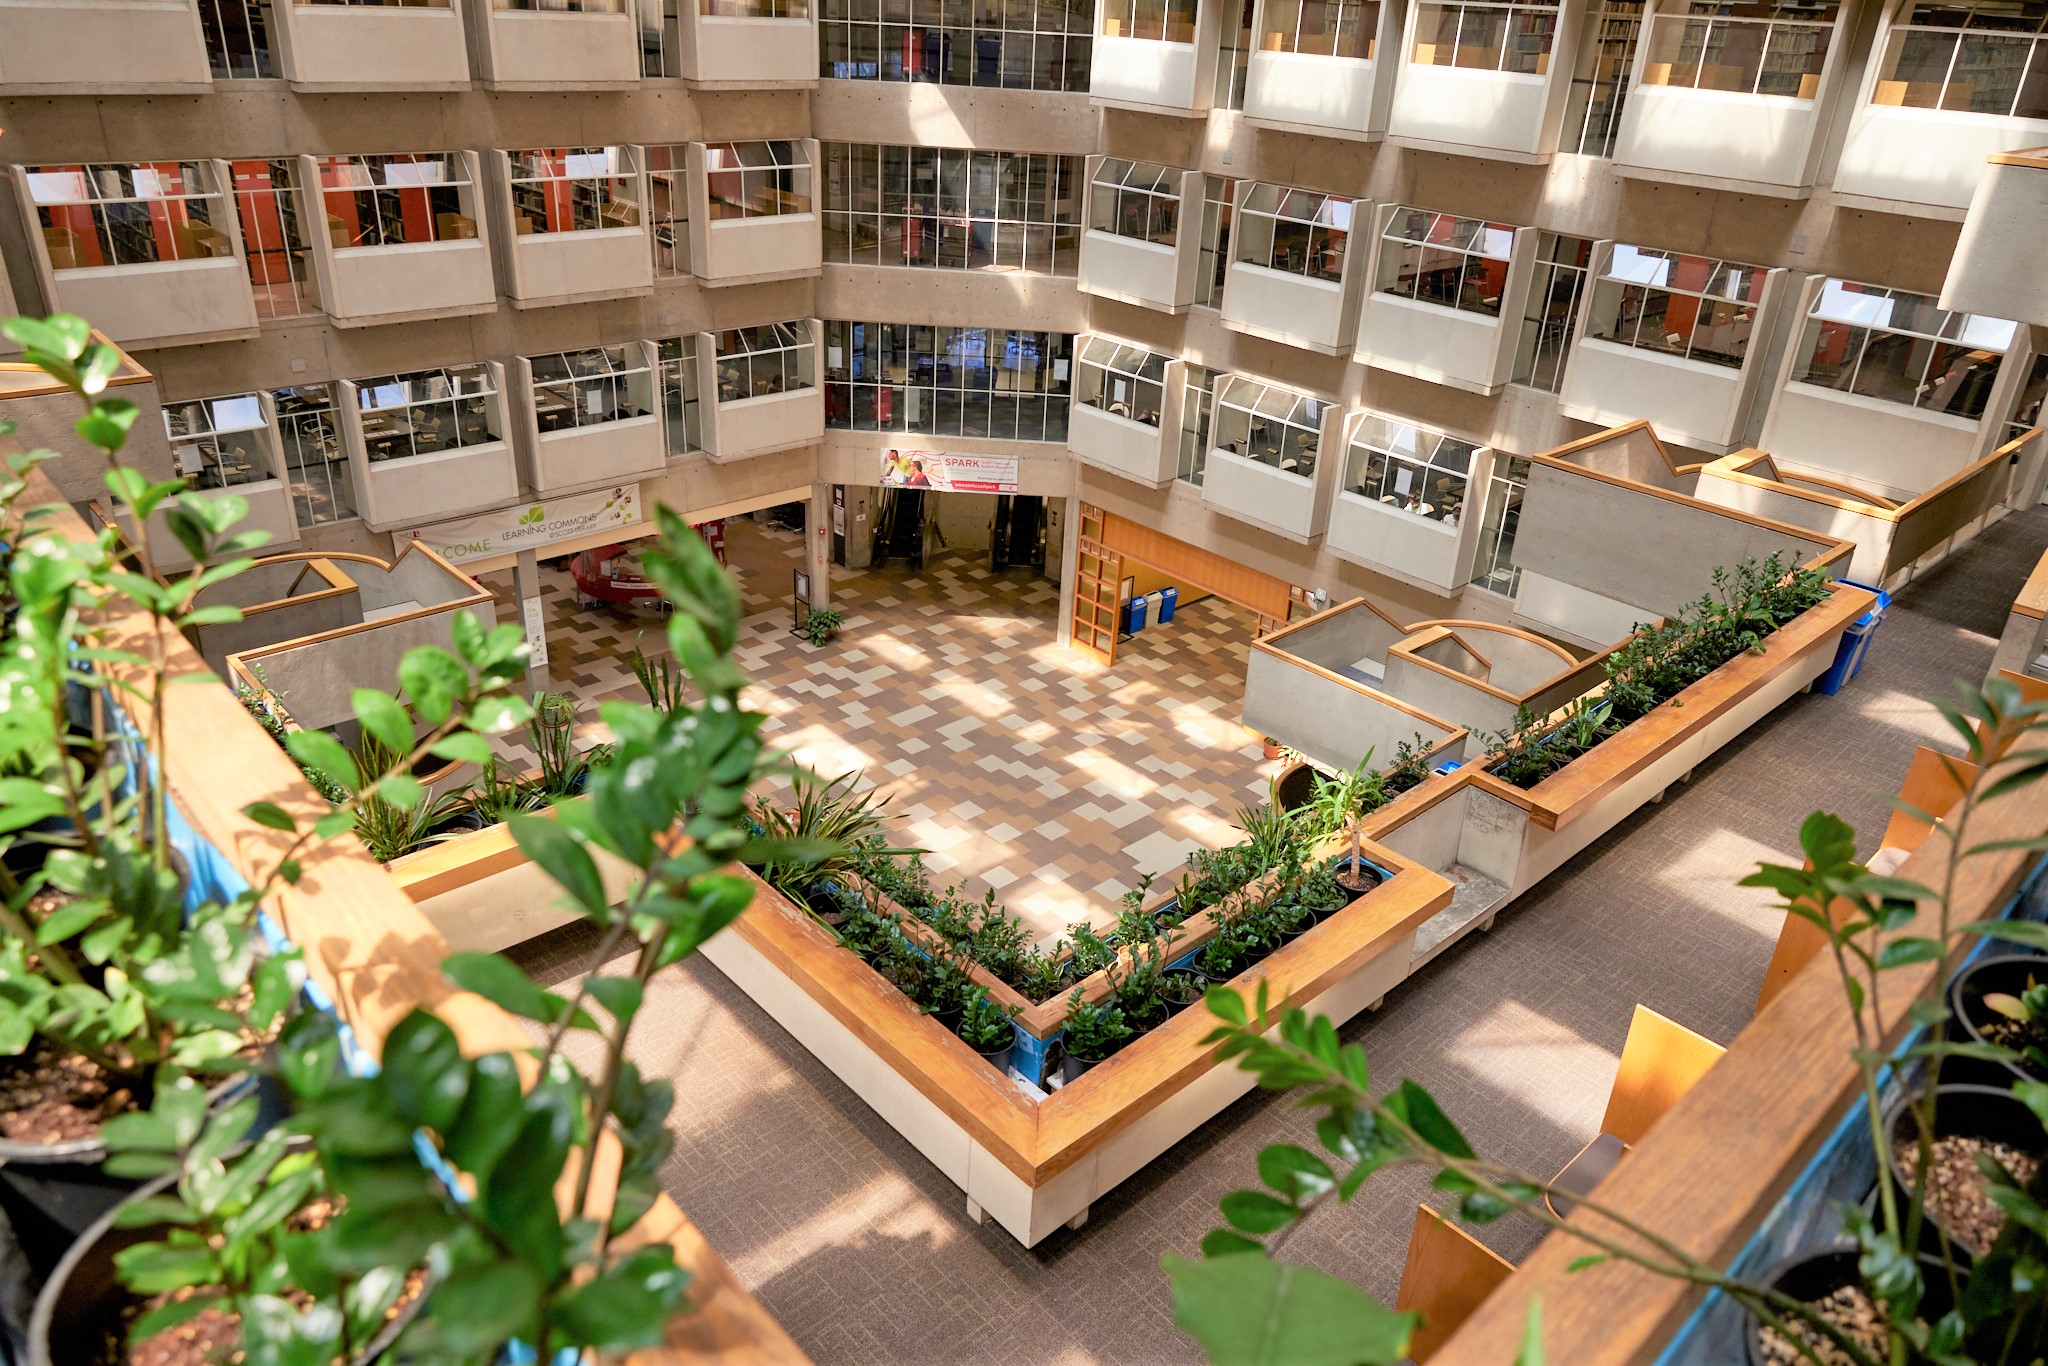 A photo of the interior of York University's Scott Library